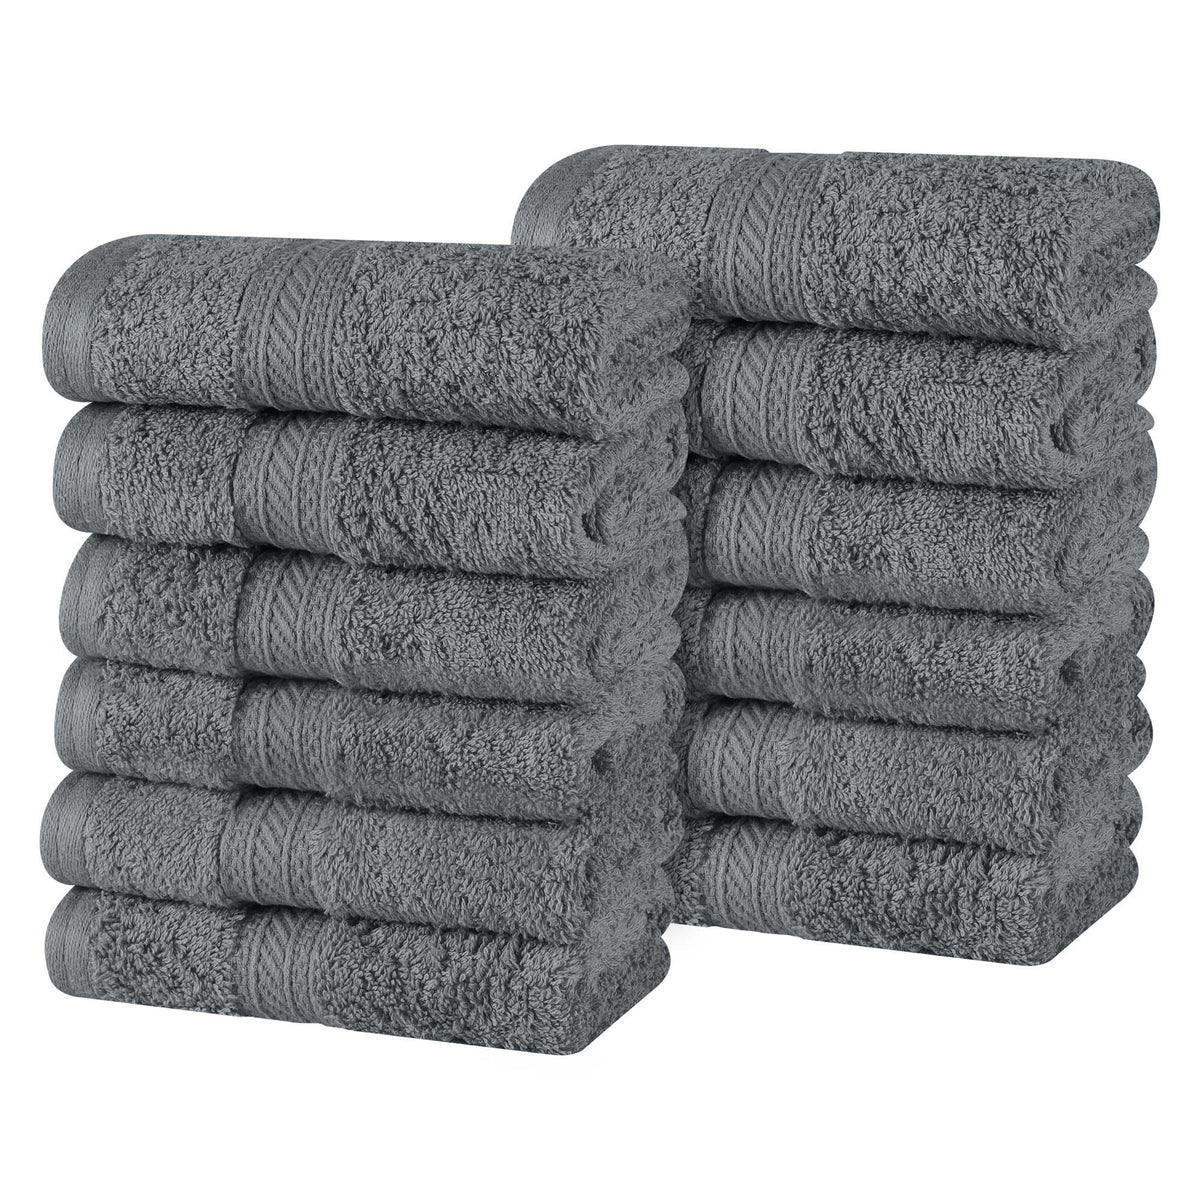 Atlas Combed Cotton Highly Absorbent Solid Face Towels / Washcloths Set of 12 - Grey